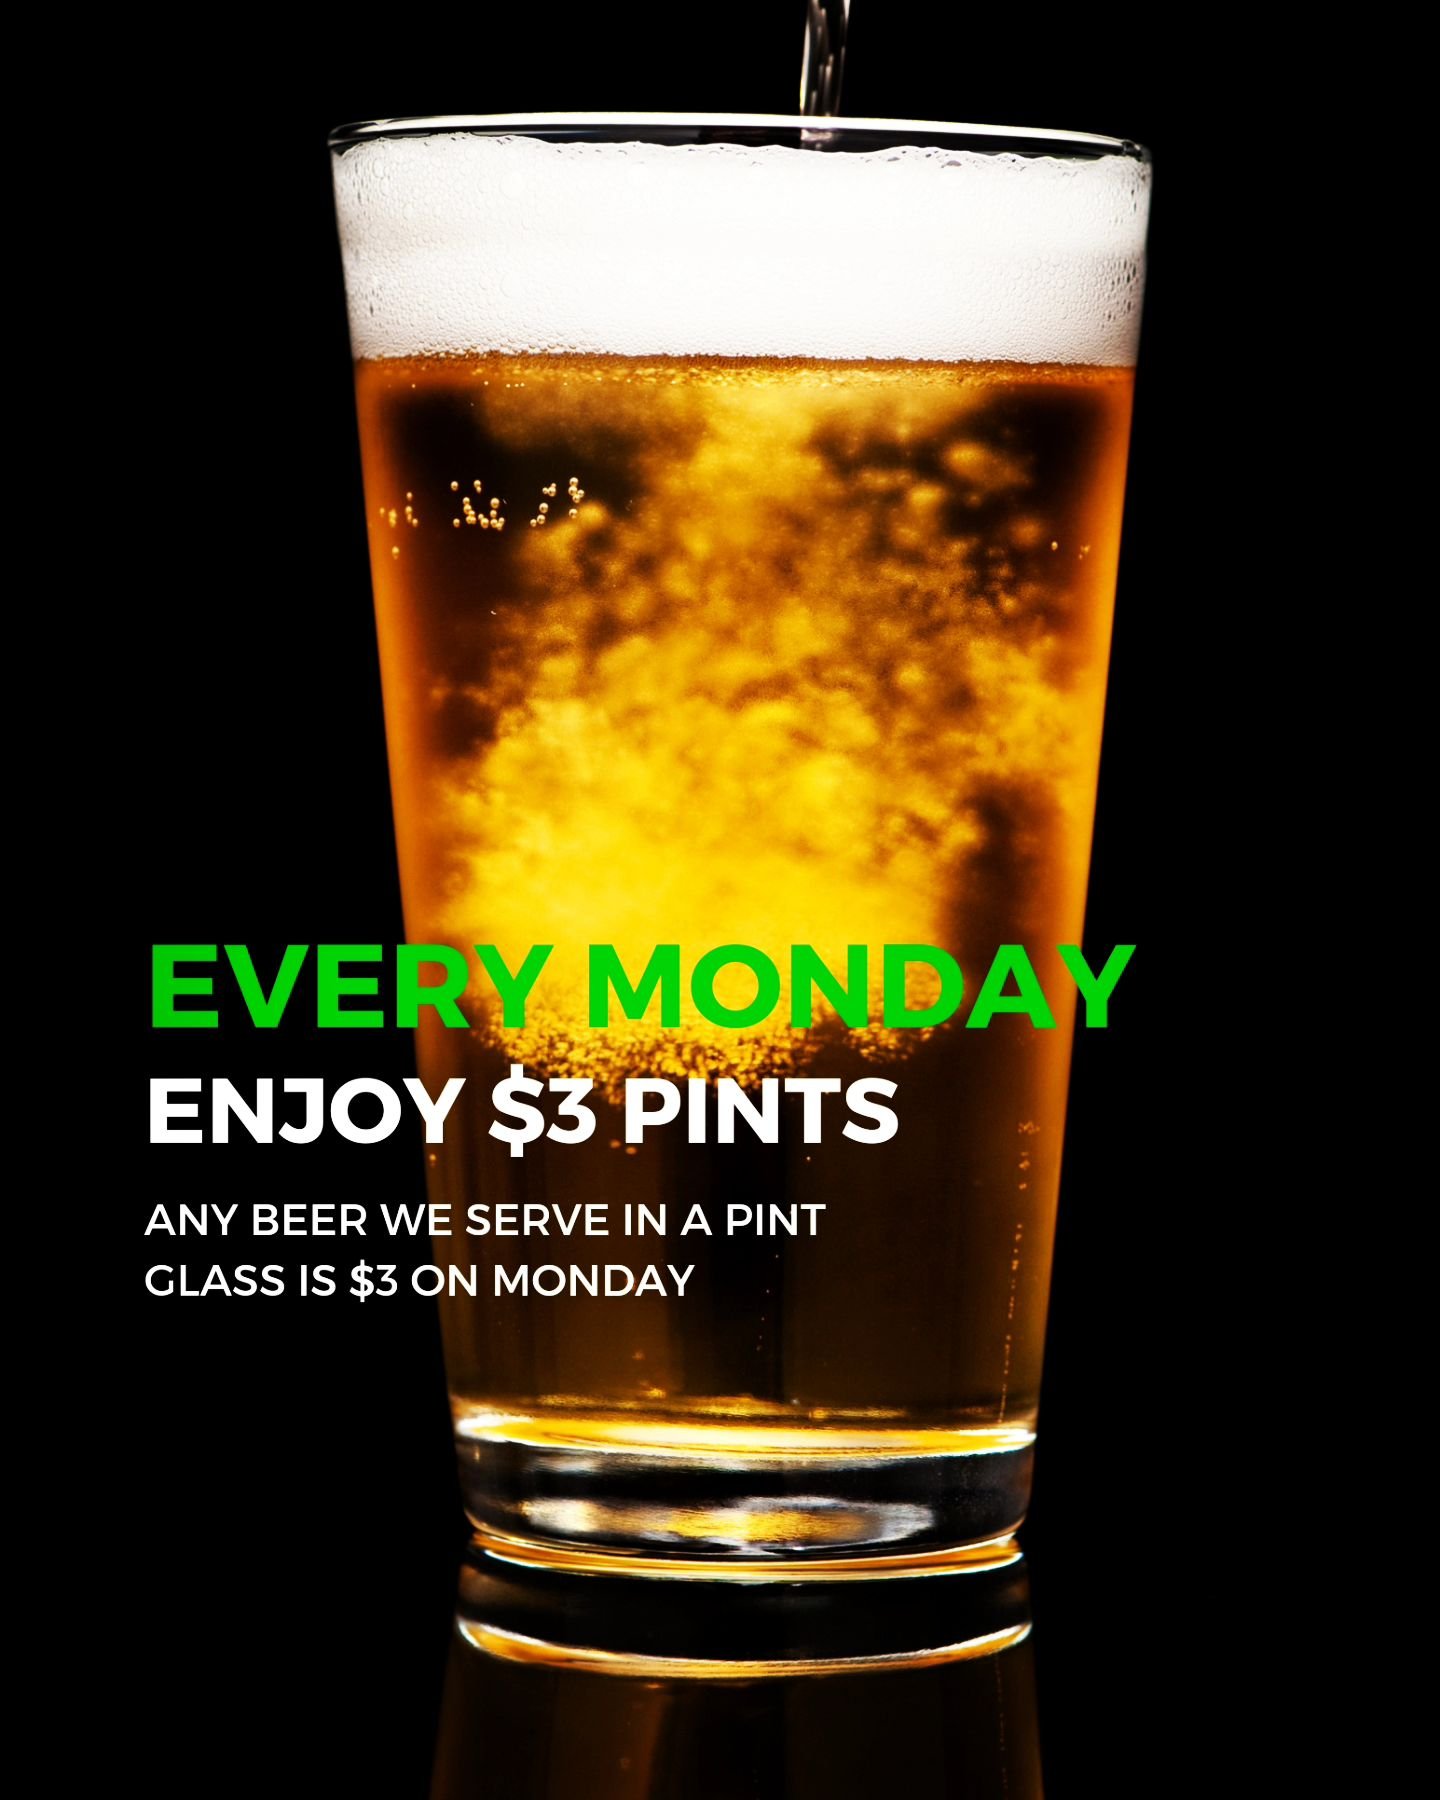 Ok, it's Monday. But who said Mondays have to suck? 

Be a rebel and have a great Monday with $3 pints of craft beer!

#VineandBarley #PortStLucie #craftbeer